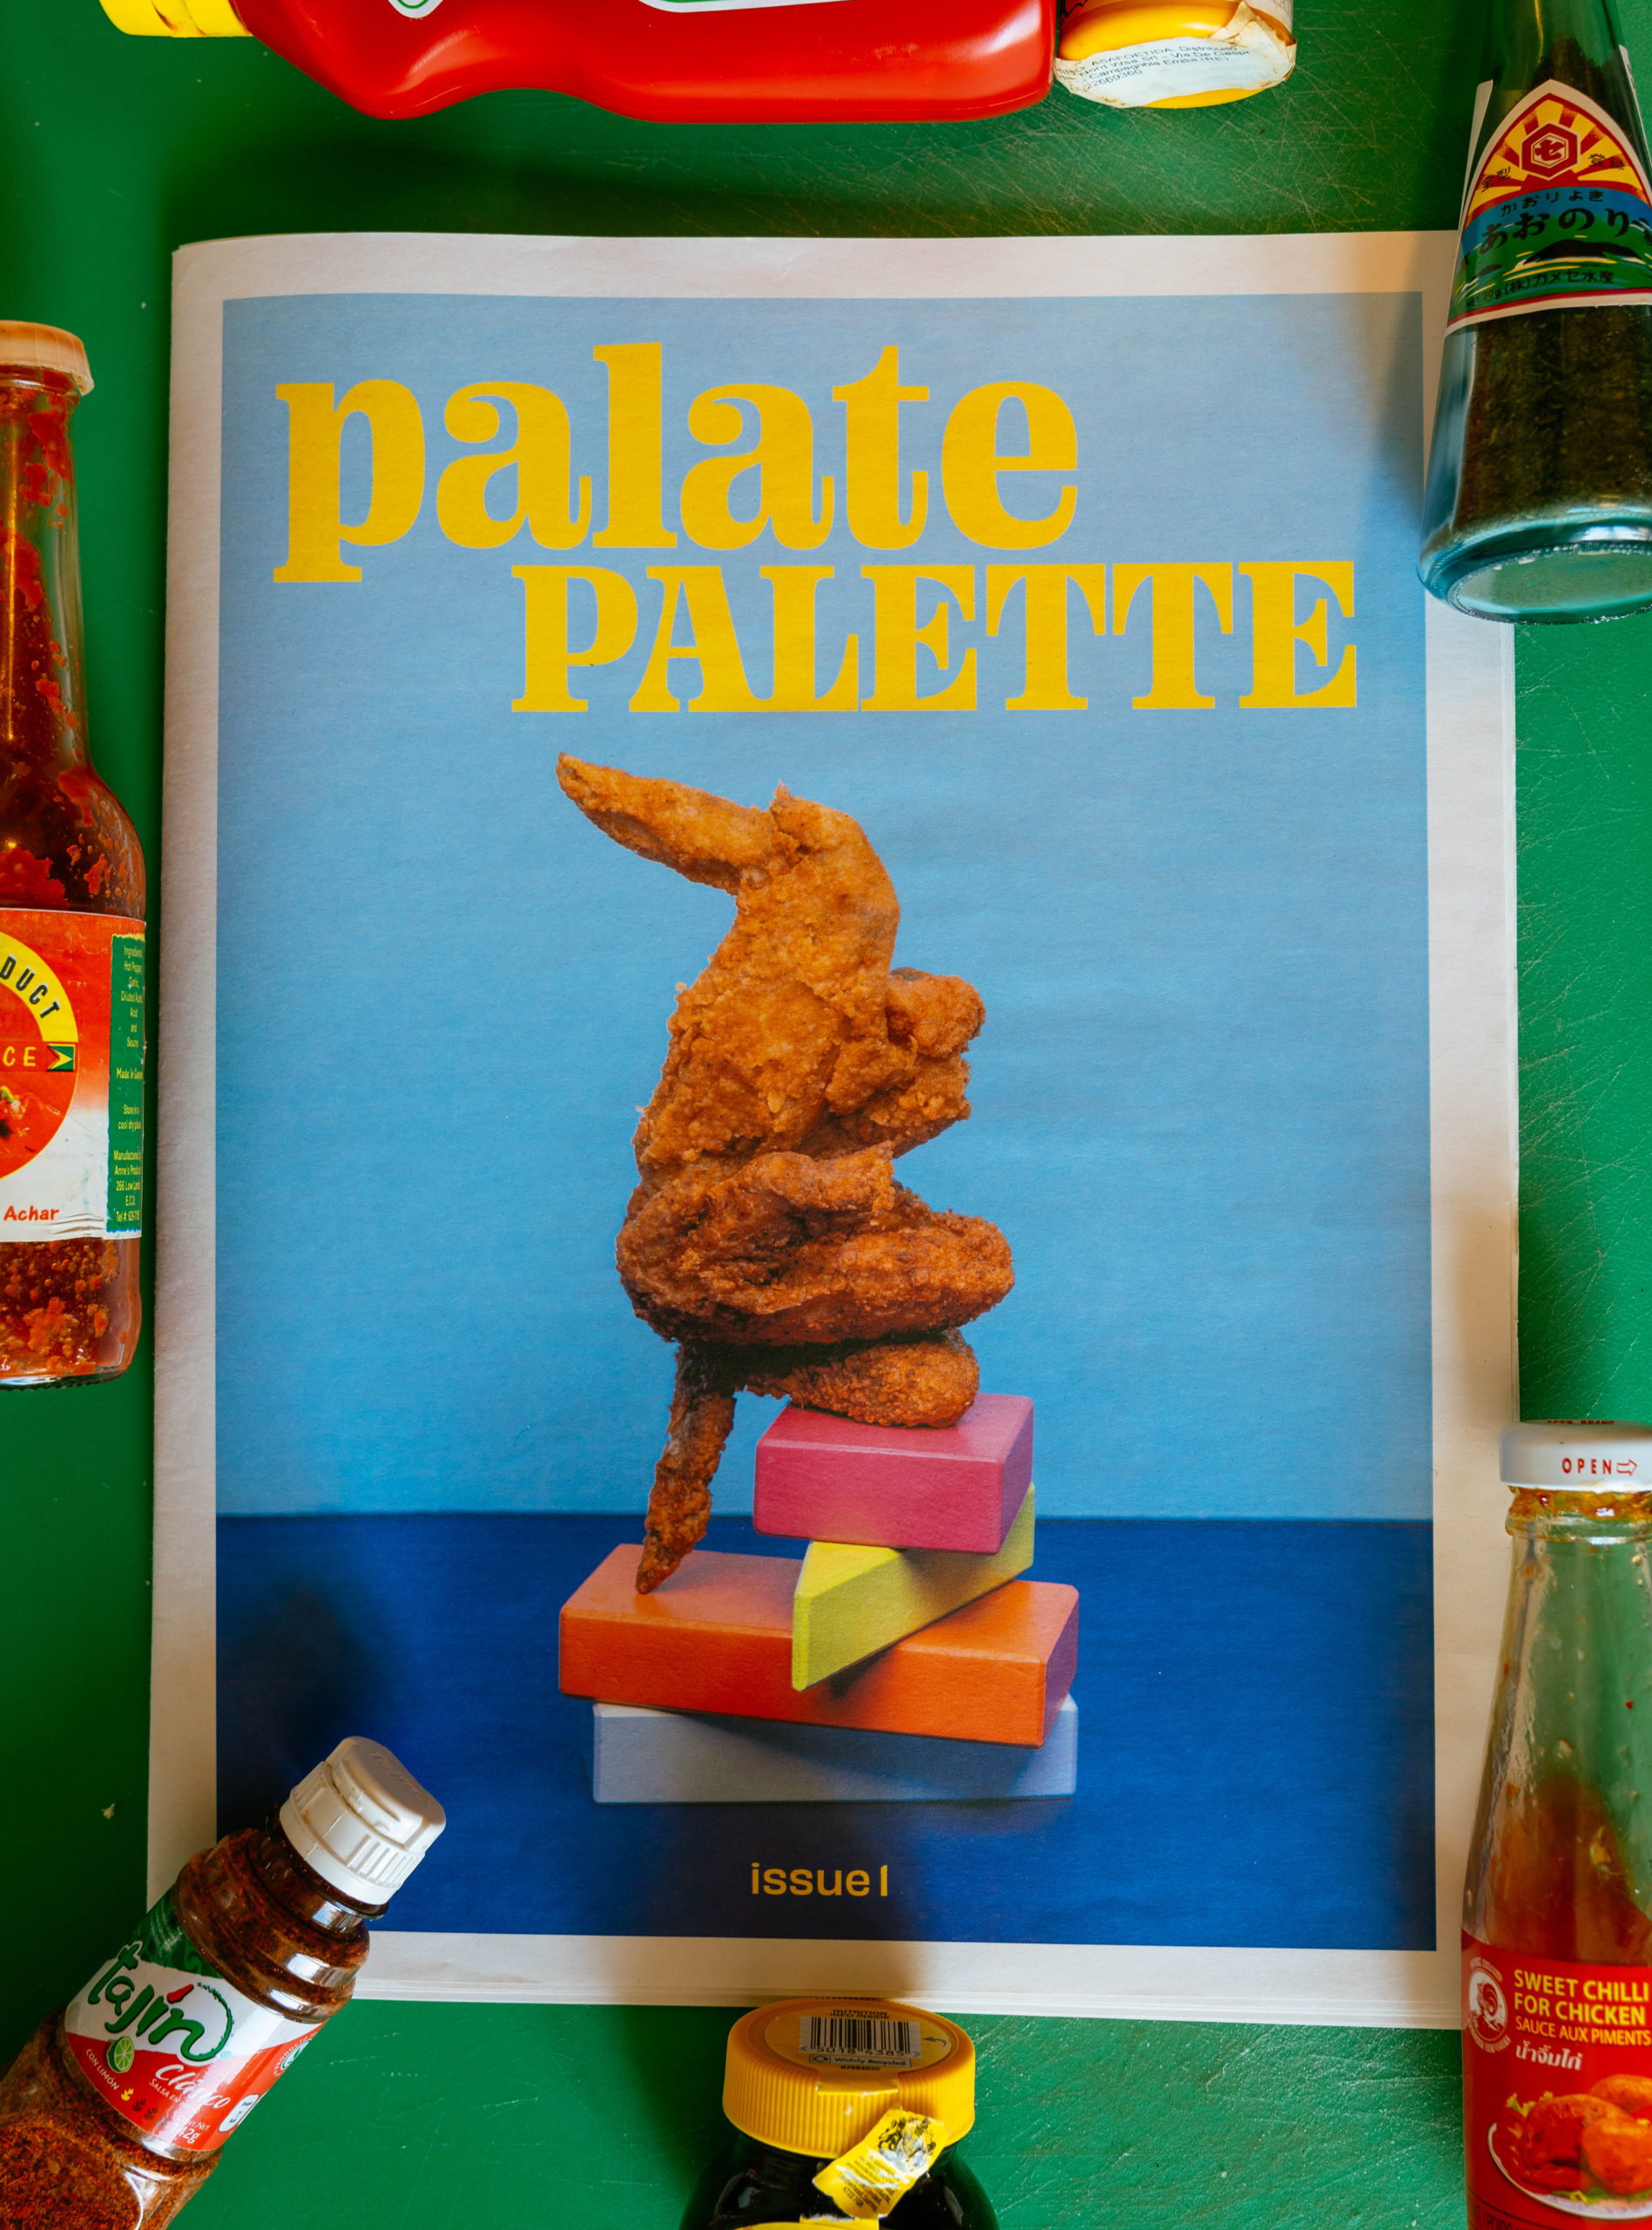 A piece of fried chicken balances on brightly colored stacked wooden blocks on the cover of the magazine Palate Palette. Hot sauce bottles surround the magazine.